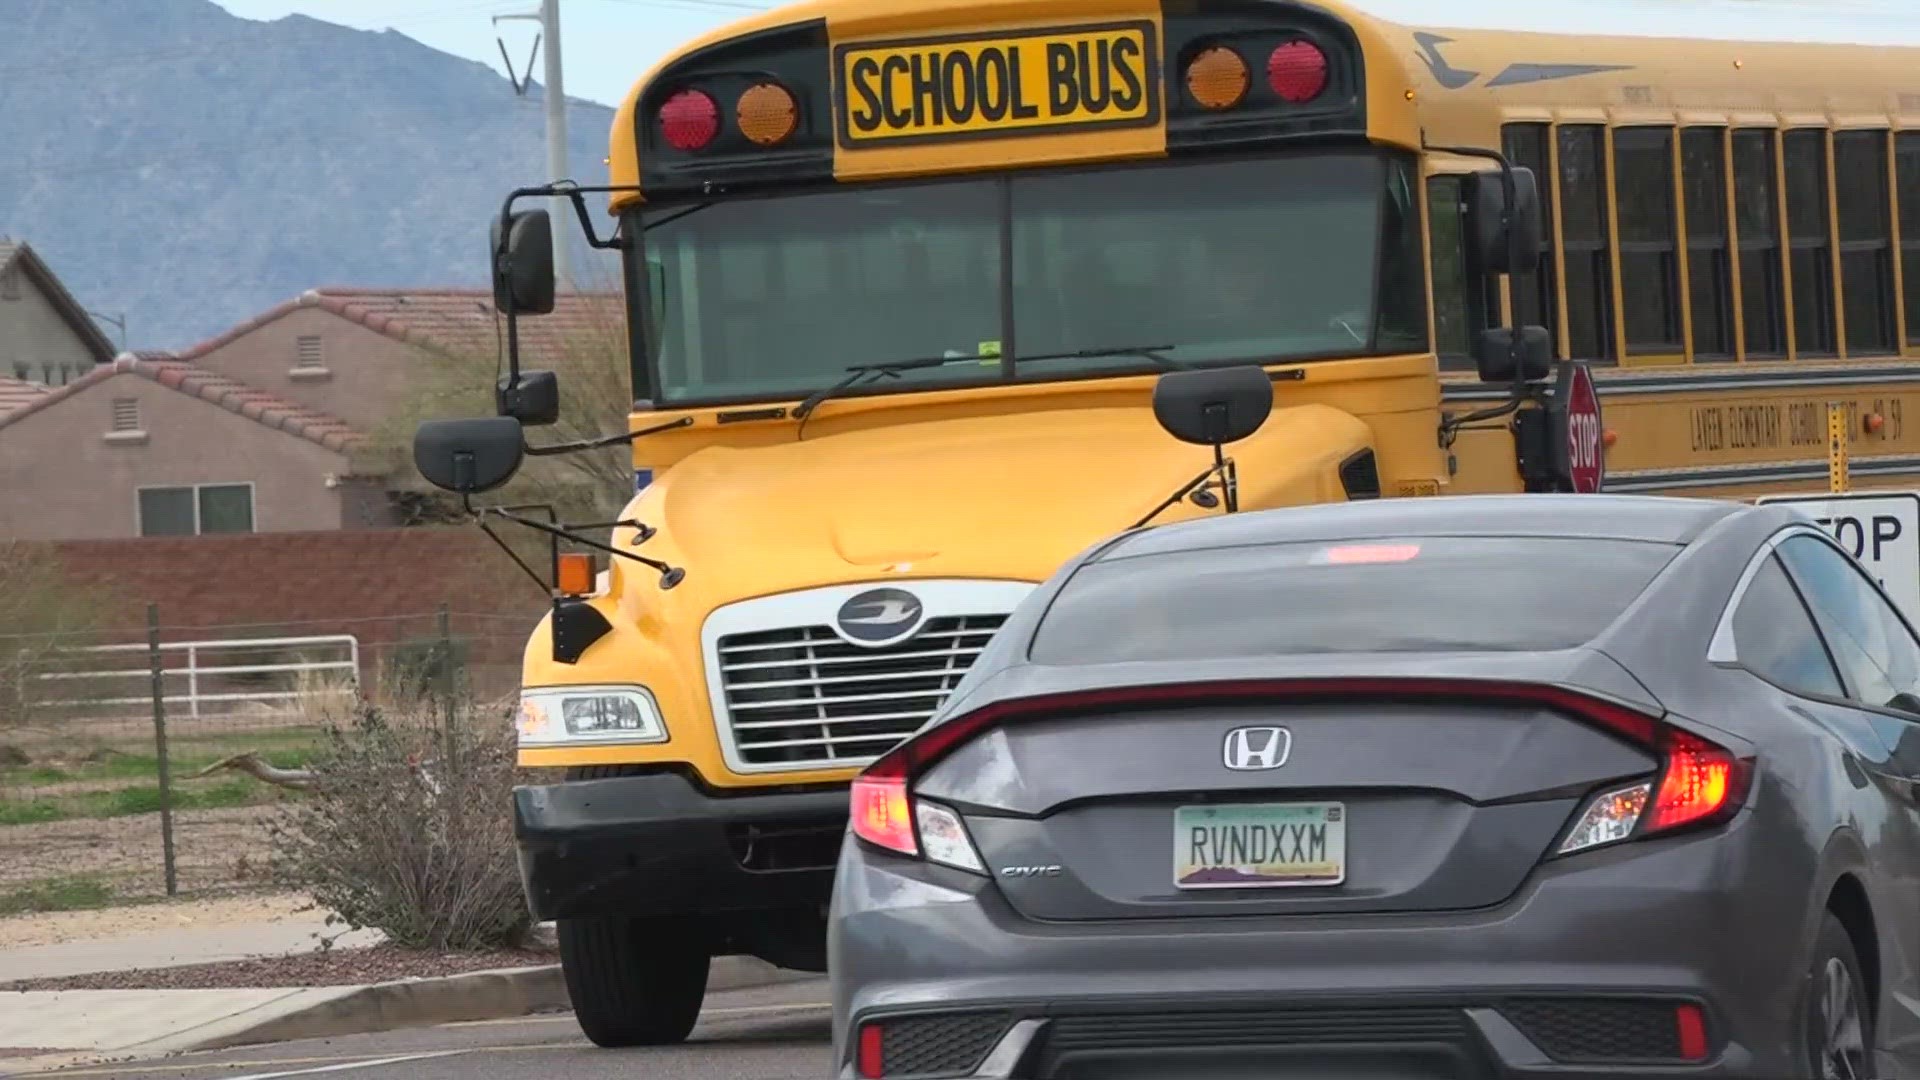 The student was found alone by a bus driver over a mile away from the school's campus.